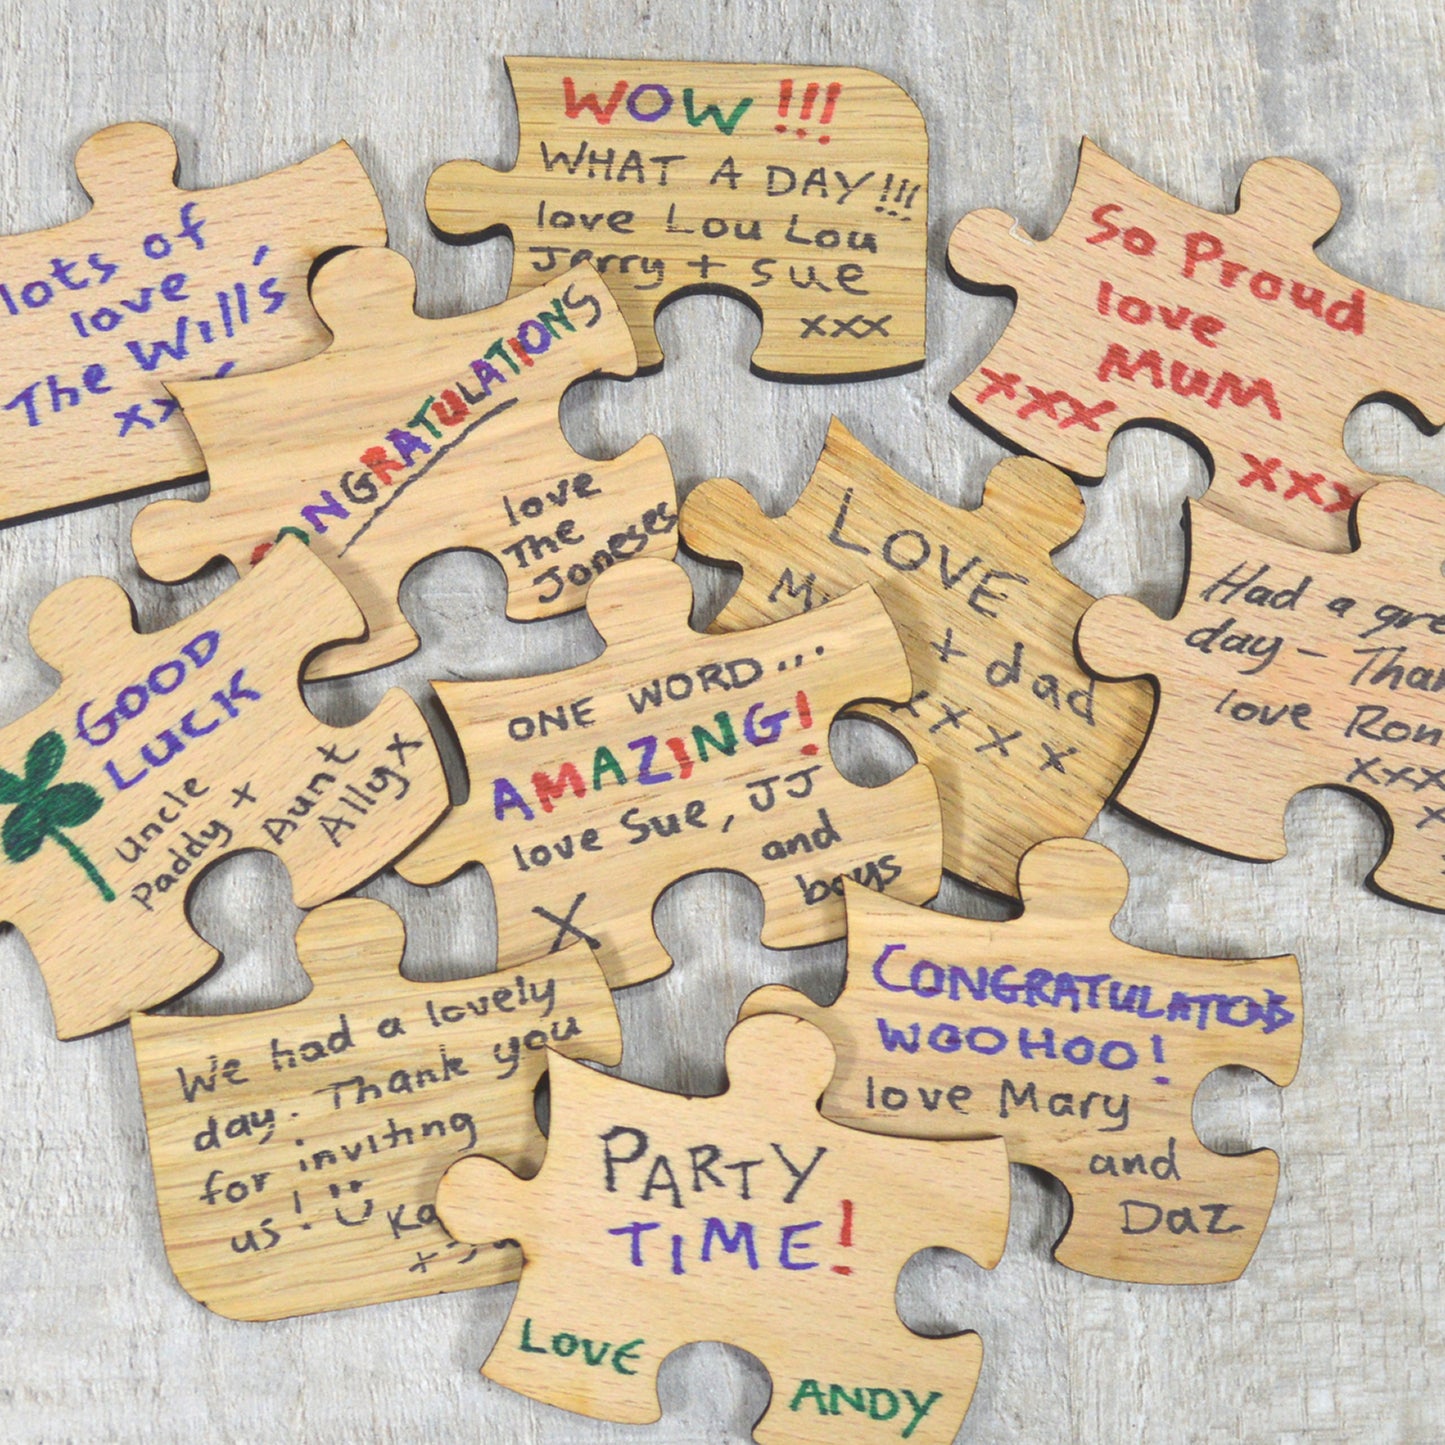 First Birthday Keepsake Guestbook - Personalised Heart Shaped Jigsaw Puzzle